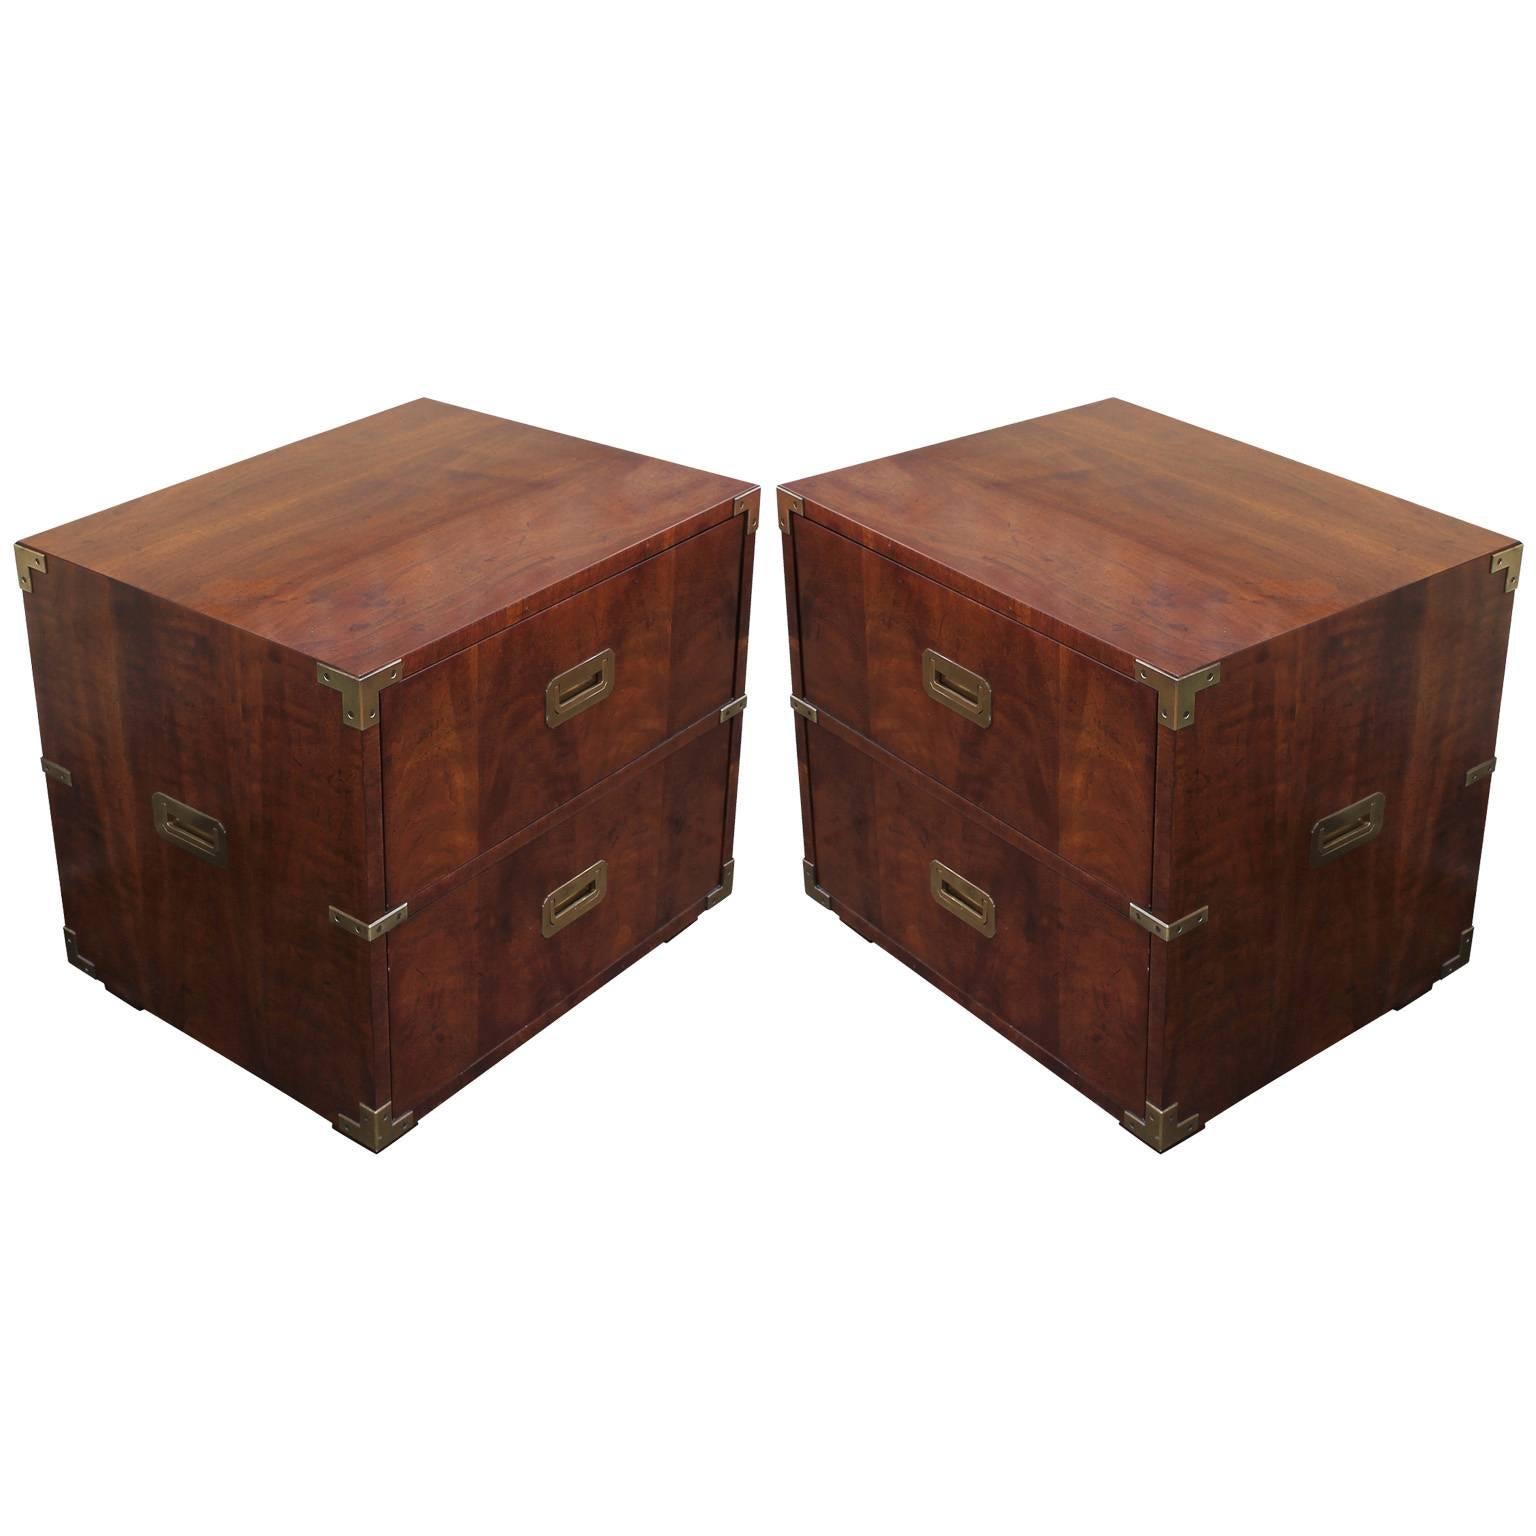 Wonderful pair of campaign style night stands or side tables by Henredon in walnut. Tables have wonderful inset brass hardware and accents. Tables rest on low square legs. In excellent vintage condition.